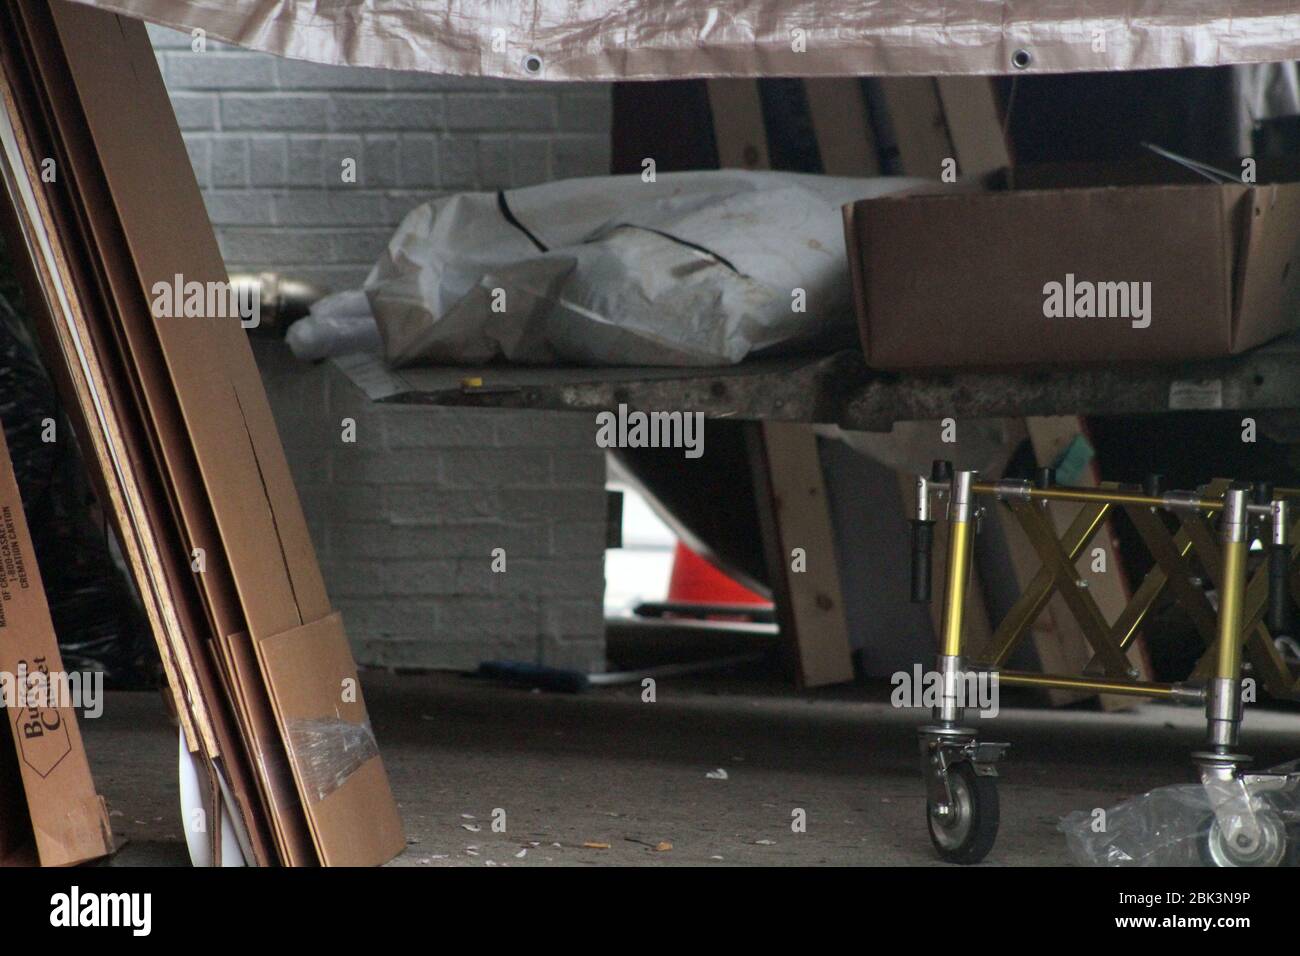 April 30, 2020, New York, New York, USA: A stained white bag containing a body have been placed on the hoist of a refrigerated truck, about to be removed from the Andrew T. Cleckley Funeral Home in Brooklyn. Cardboard coffins and a stretcher are next to it. 60 bodies were stored in 4 non-refregerated vehiciles lining the street nearby stores. Neighbors reported a foul smell still persistent and fluids dripping from the trucks. Some remains were also found lying on the facilityÃ¢â‚¬â„¢s floor. The funeral home was overwhelmed by COVID-19 deaths in New York. (Credit Image: © Marie Le Ble/ZUMA Wi Stock Photo